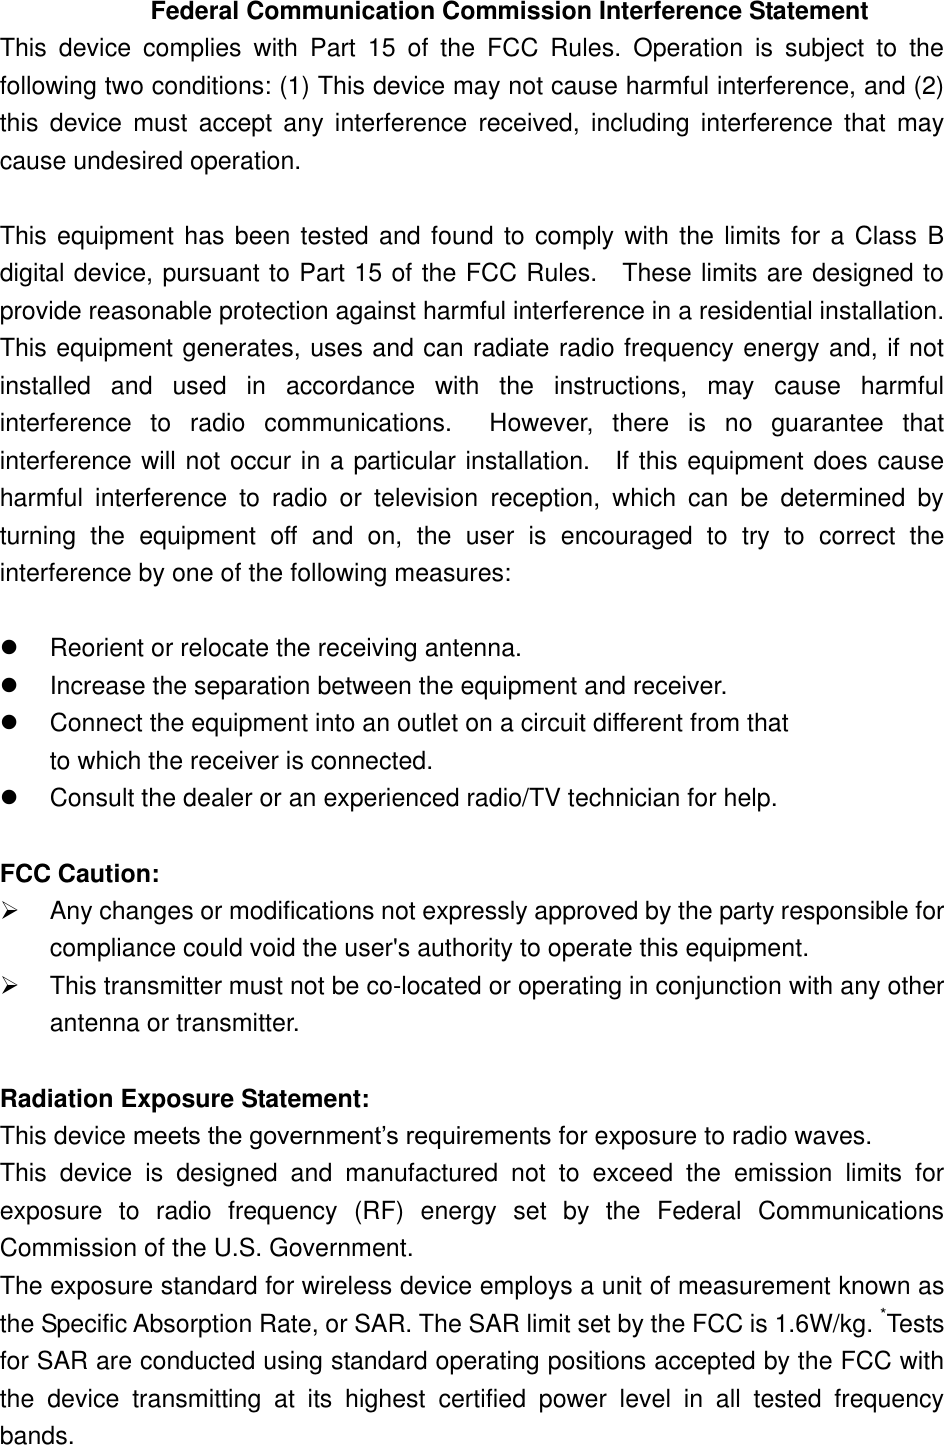   Federal Communication Commission Interference Statement This  device  complies  with  Part  15  of  the  FCC  Rules.  Operation  is  subject  to  the following two conditions: (1) This device may not cause harmful interference, and (2) this  device  must  accept  any  interference  received,  including  interference  that  may cause undesired operation.  This equipment has been tested and found to comply with the limits for a Class B digital device, pursuant to Part 15 of the FCC Rules.    These limits are designed to provide reasonable protection against harmful interference in a residential installation. This equipment generates, uses and can radiate radio frequency energy and, if not installed  and  used  in  accordance  with  the  instructions,  may  cause  harmful interference  to  radio  communications.    However,  there  is  no  guarantee  that interference will not occur in a particular installation.    If this equipment does cause harmful  interference  to  radio  or  television  reception,  which  can  be  determined  by turning  the  equipment  off  and  on,  the  user  is  encouraged  to  try  to  correct  the interference by one of the following measures:    Reorient or relocate the receiving antenna.   Increase the separation between the equipment and receiver.   Connect the equipment into an outlet on a circuit different from that to which the receiver is connected.   Consult the dealer or an experienced radio/TV technician for help.  FCC Caution:   Any changes or modifications not expressly approved by the party responsible for compliance could void the user&apos;s authority to operate this equipment.   This transmitter must not be co-located or operating in conjunction with any other antenna or transmitter.  Radiation Exposure Statement: This device meets the government’s requirements for exposure to radio waves. This  device  is  designed  and  manufactured  not  to  exceed  the  emission  limits  for exposure  to  radio  frequency  (RF)  energy  set  by  the  Federal  Communications Commission of the U.S. Government. The exposure standard for wireless device employs a unit of measurement known as the Specific Absorption Rate, or SAR. The SAR limit set by the FCC is 1.6W/kg. *Tests for SAR are conducted using standard operating positions accepted by the FCC with the  device  transmitting  at  its  highest  certified  power  level  in  all  tested  frequency bands. 